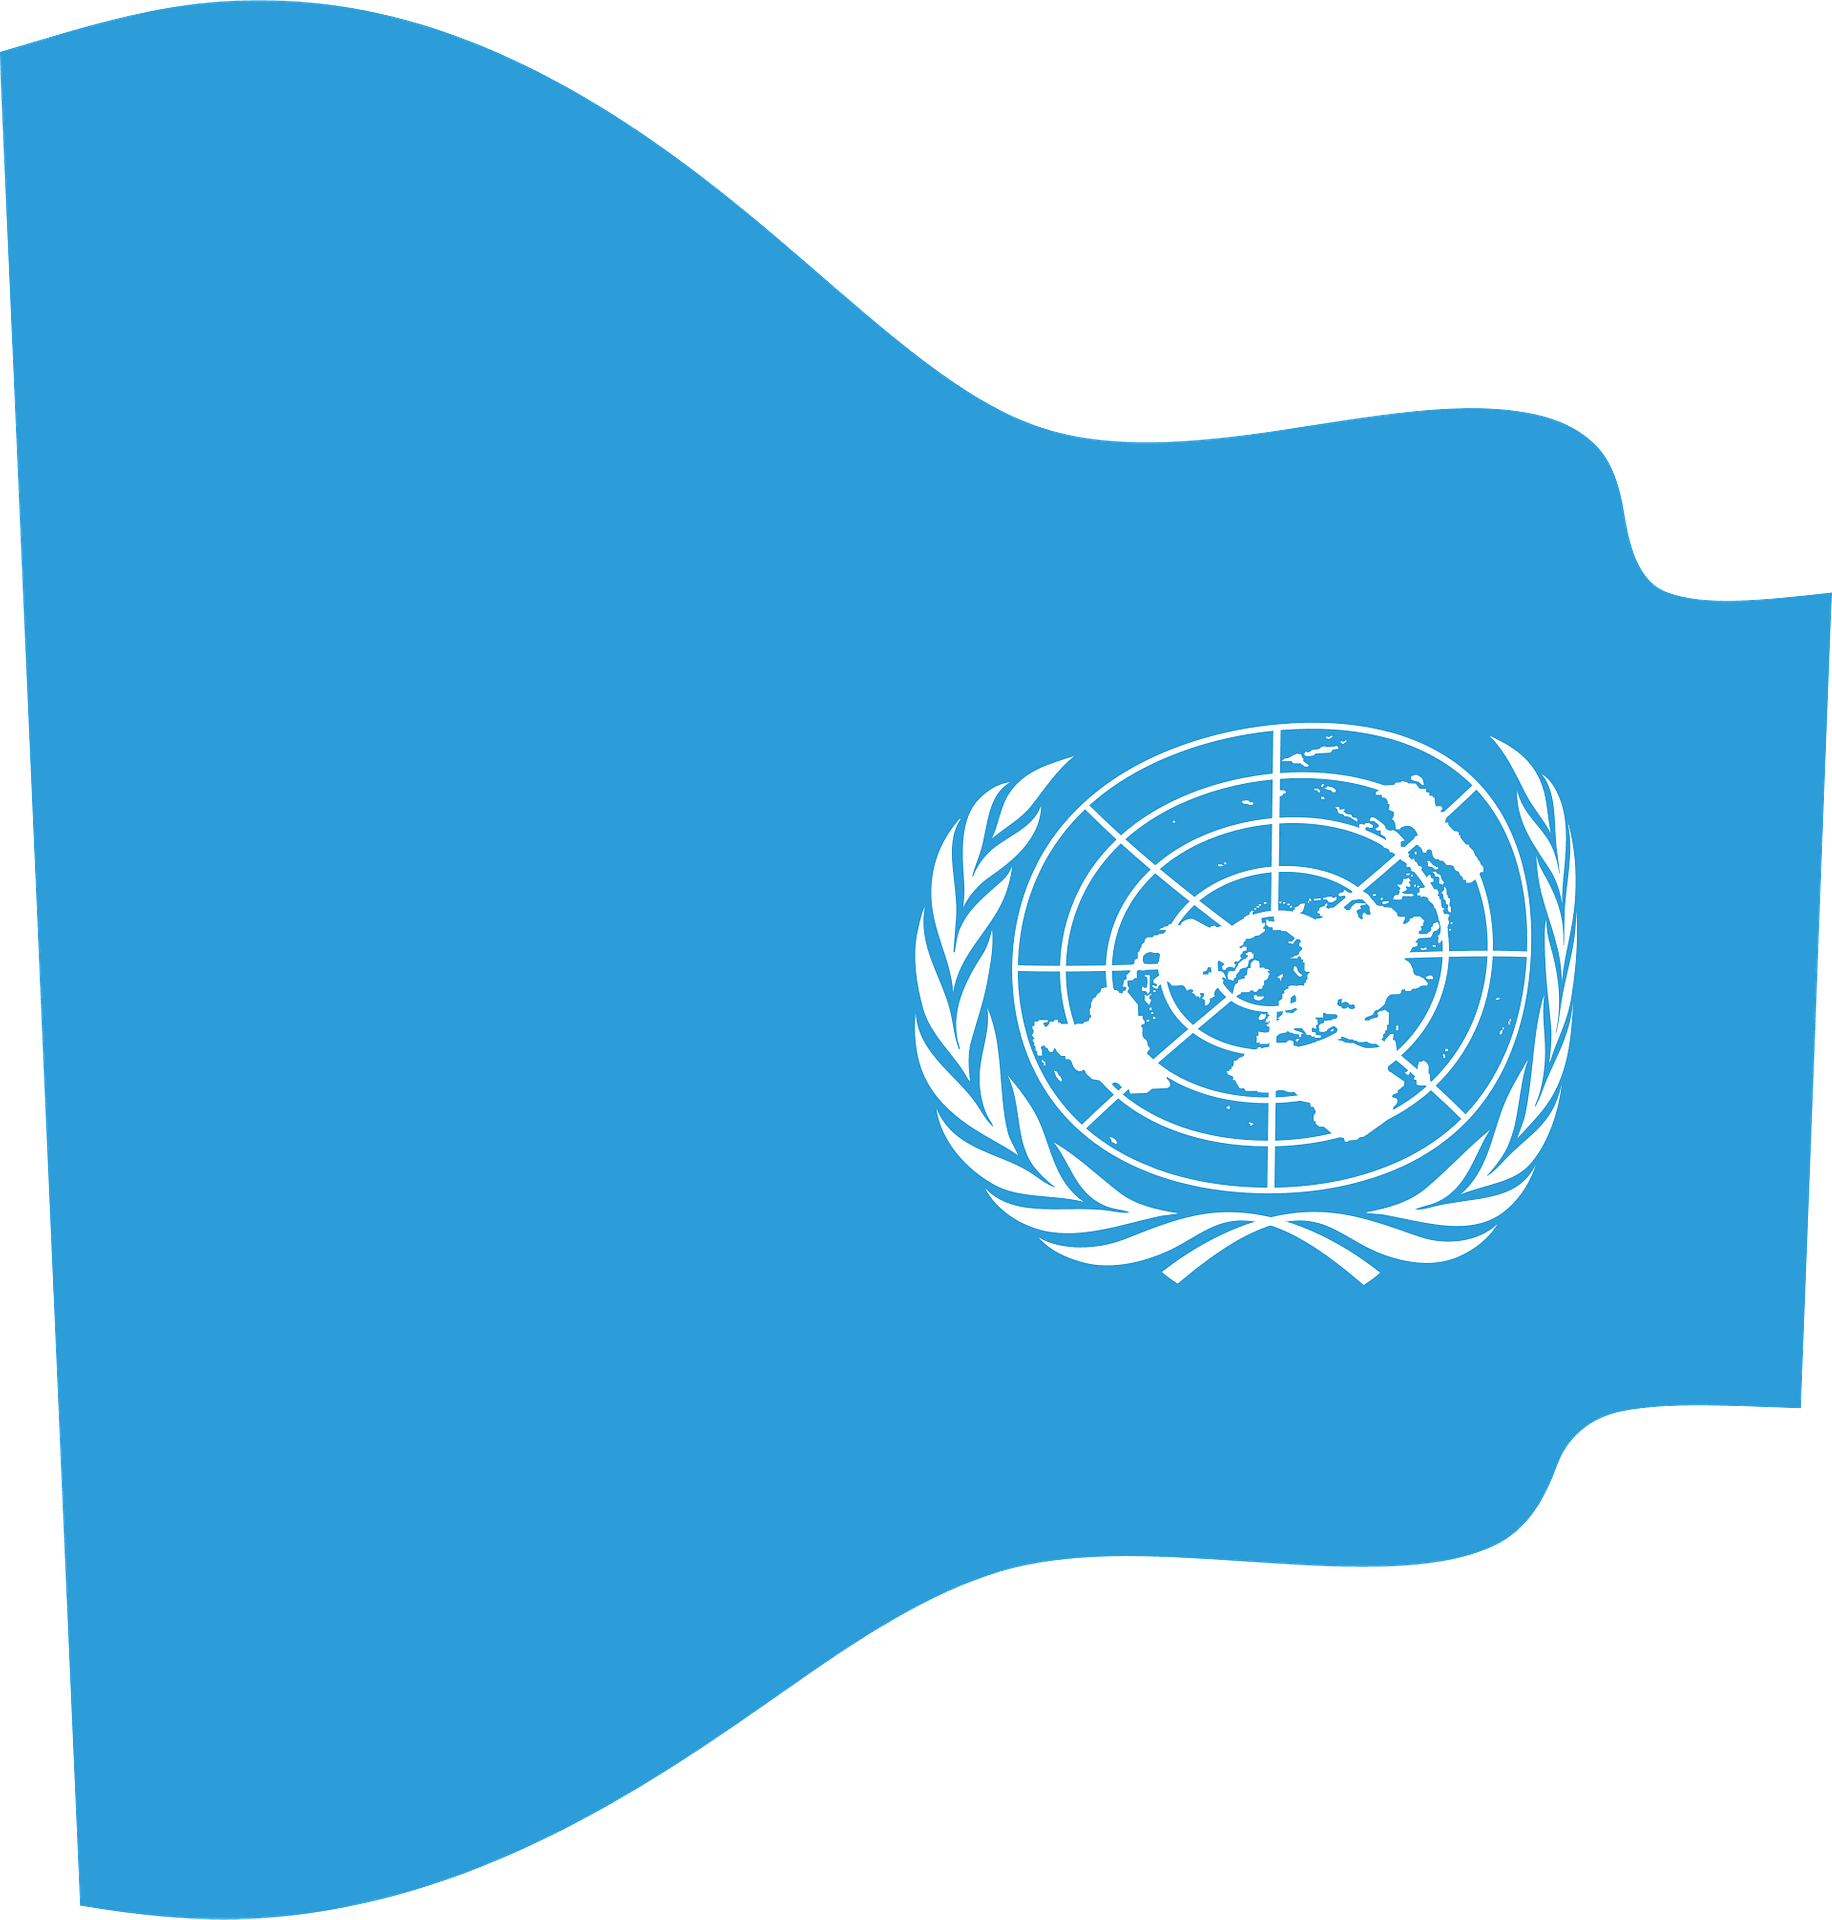 United Nations Flag PNG Photos